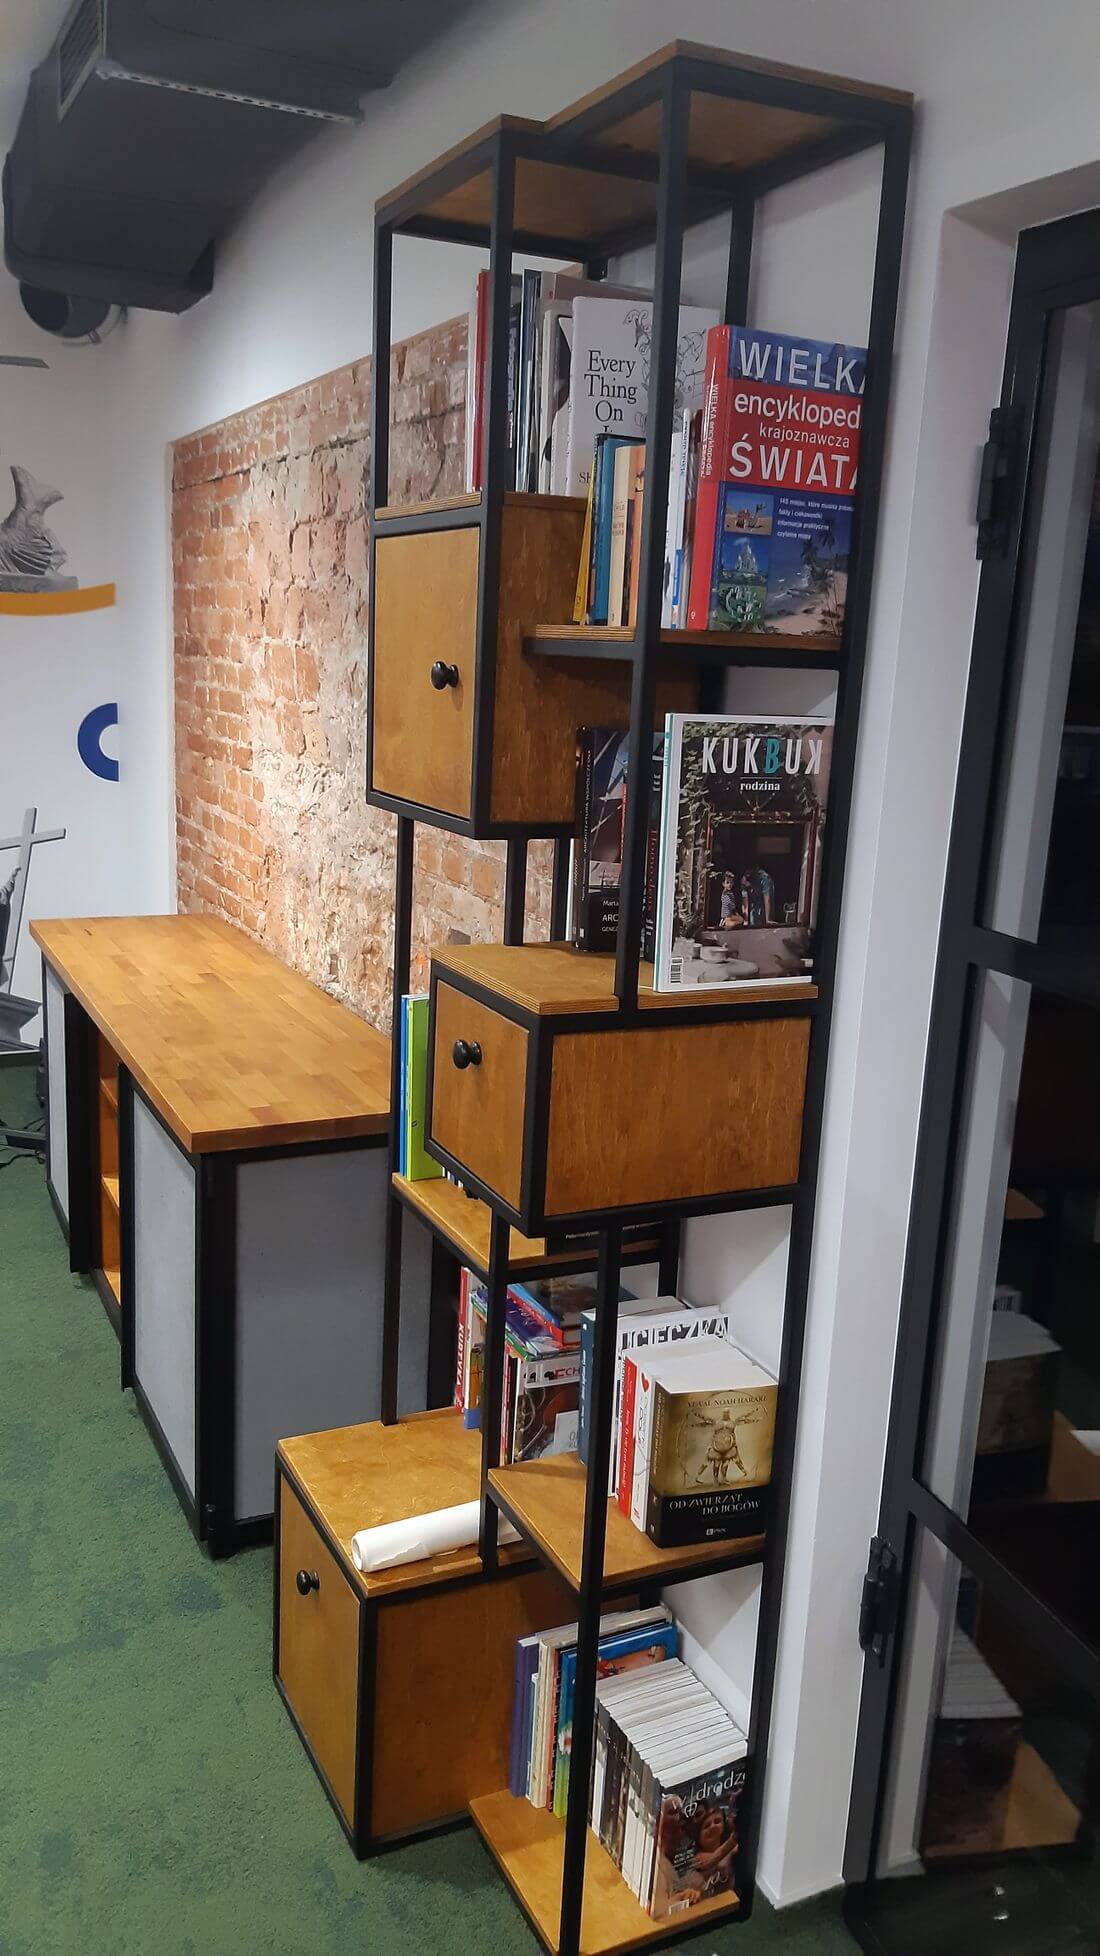 Loft Bookshelf R1 high shelf with books on shelves with drawers made of structural steel and oak wood